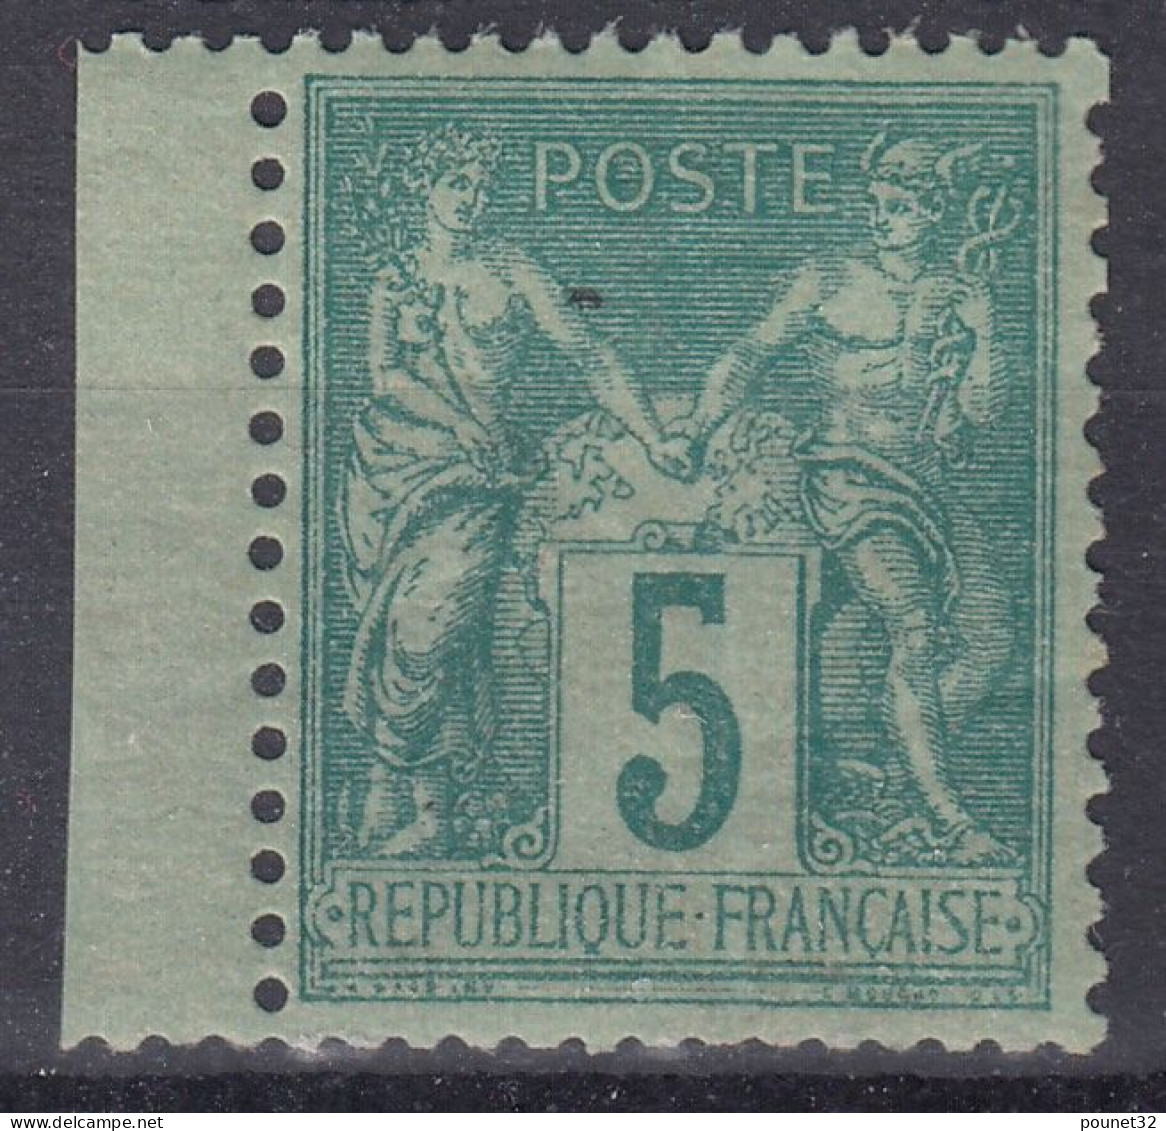 TIMBRE FRANCE SAGE N° 75 RARE RECTO VERSO INTEGRAL NEUF ** GOMME SANS CHARNIERE - 1876-1898 Sage (Type II)